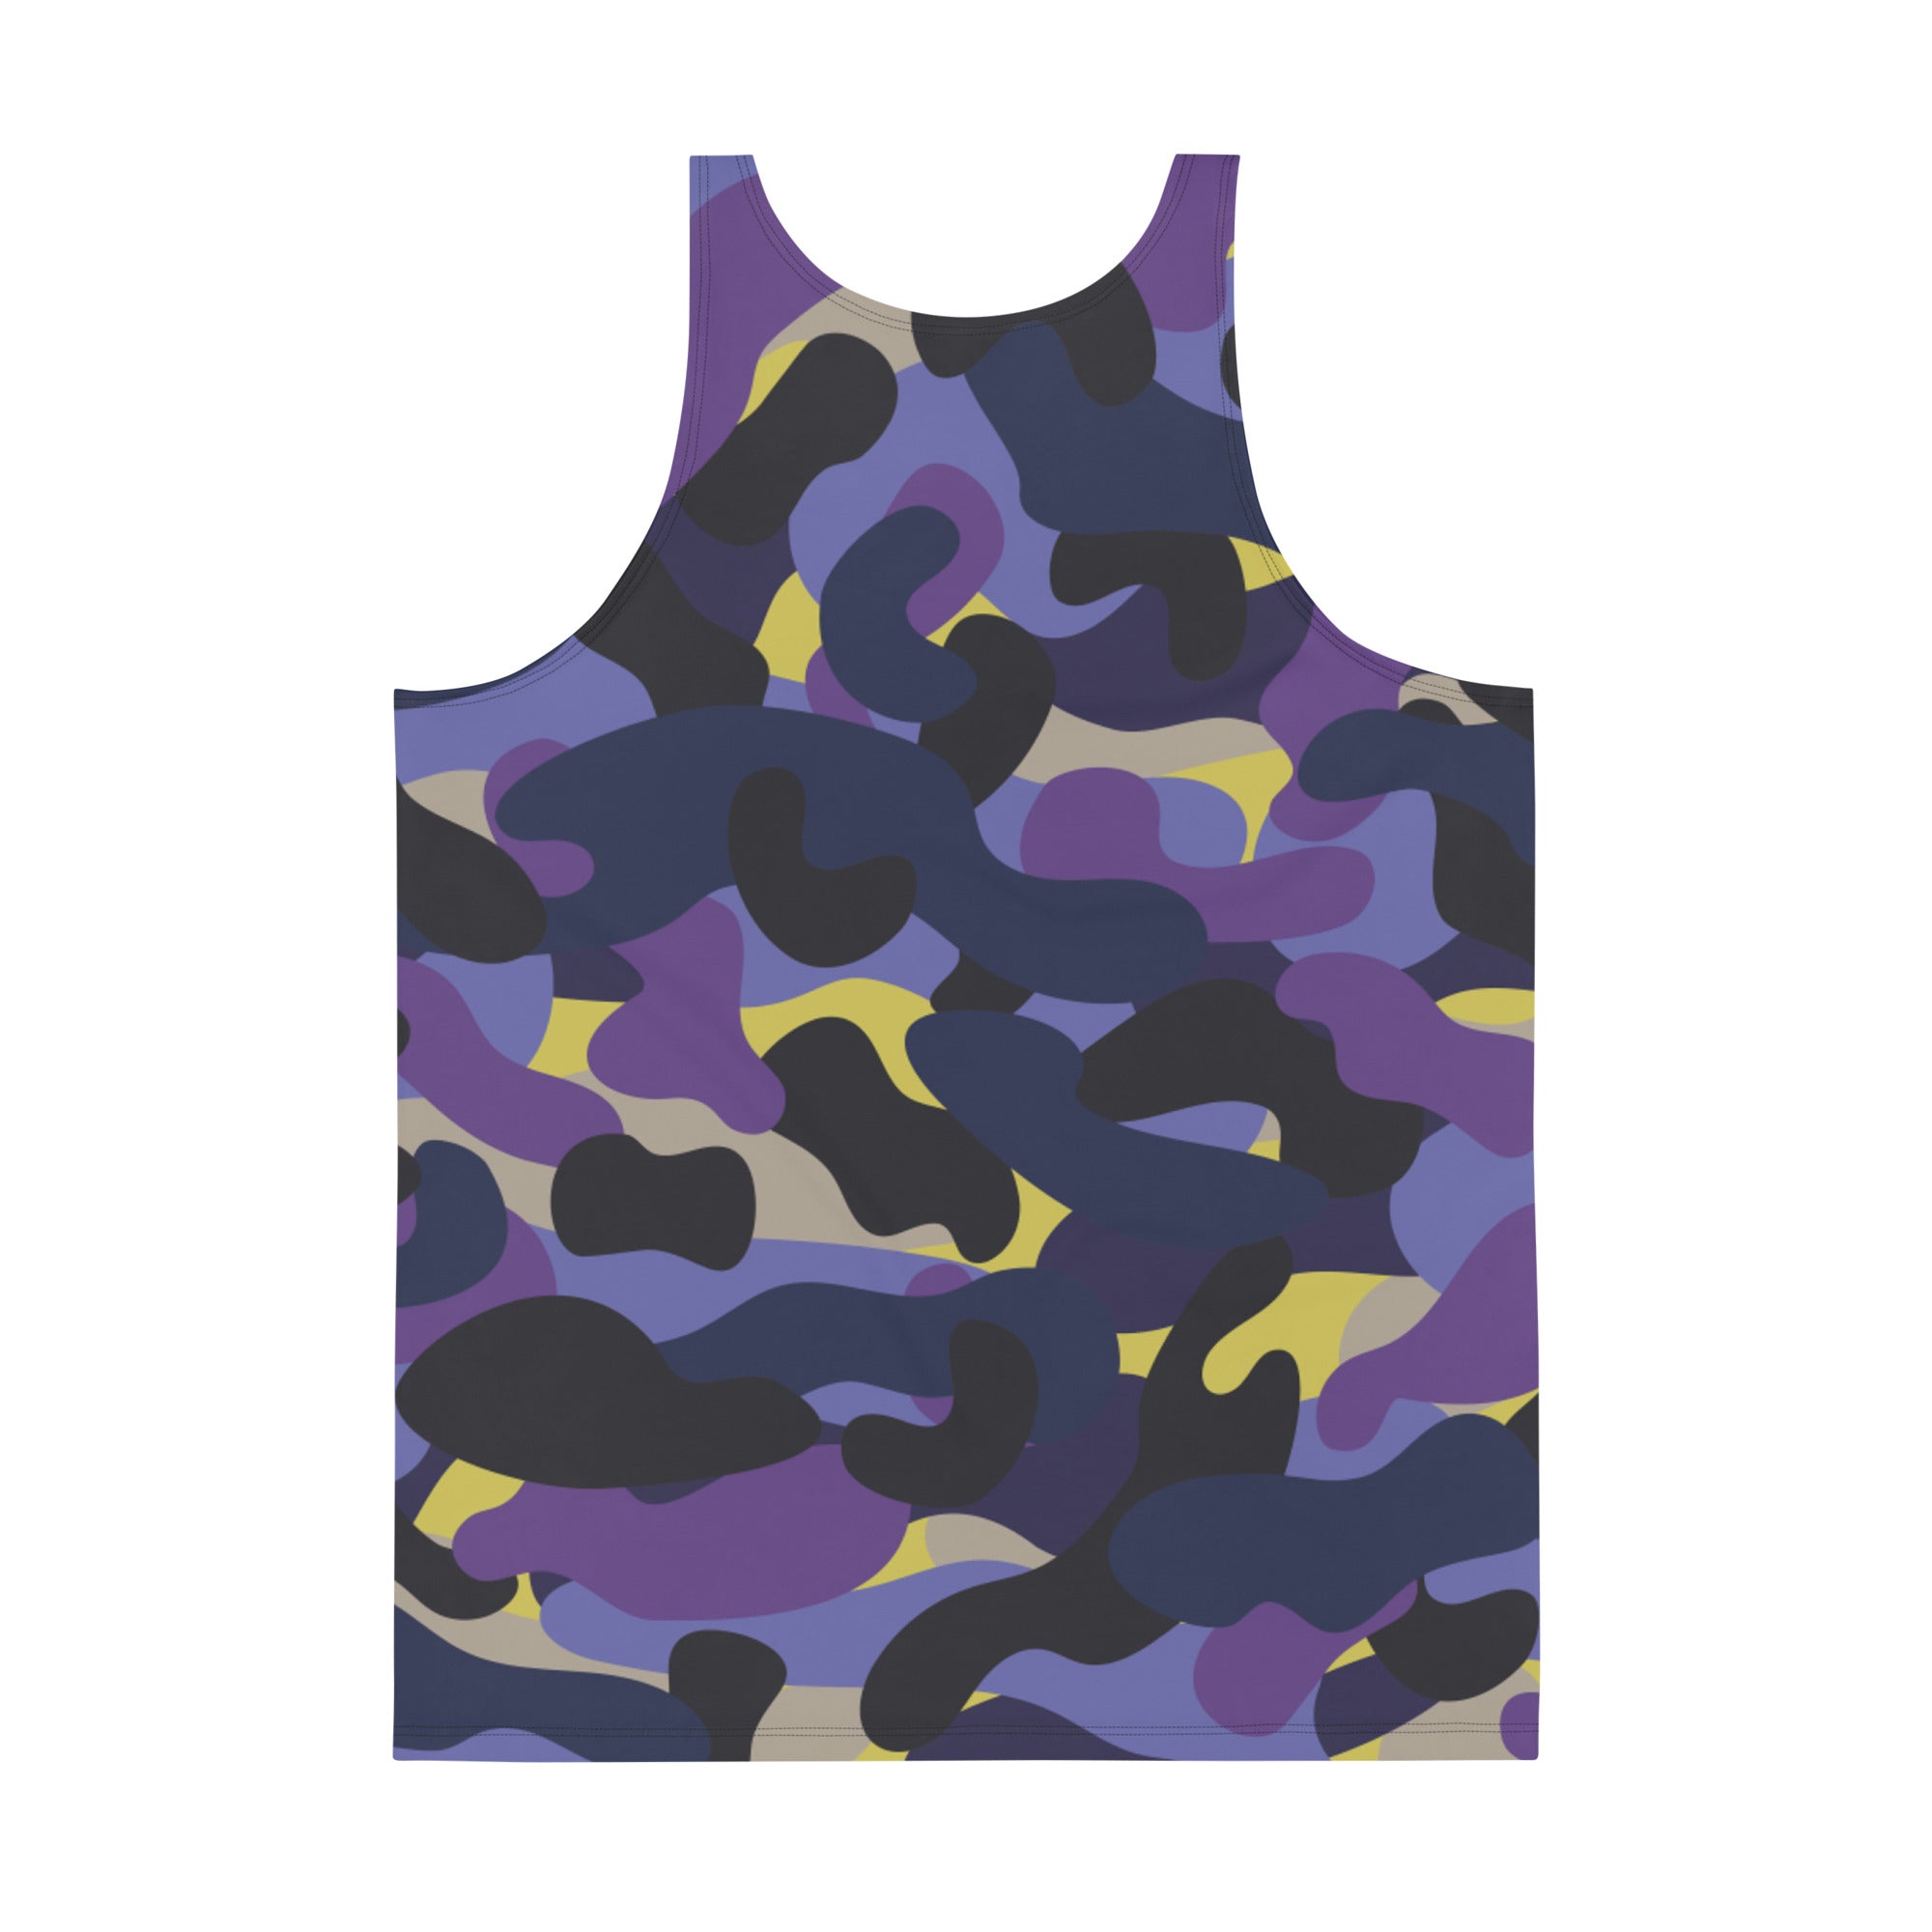 "Juicy Af" Tank Camo - Krazy Muscle Nutrition Krazy Muscle Nutrition2566062_9049